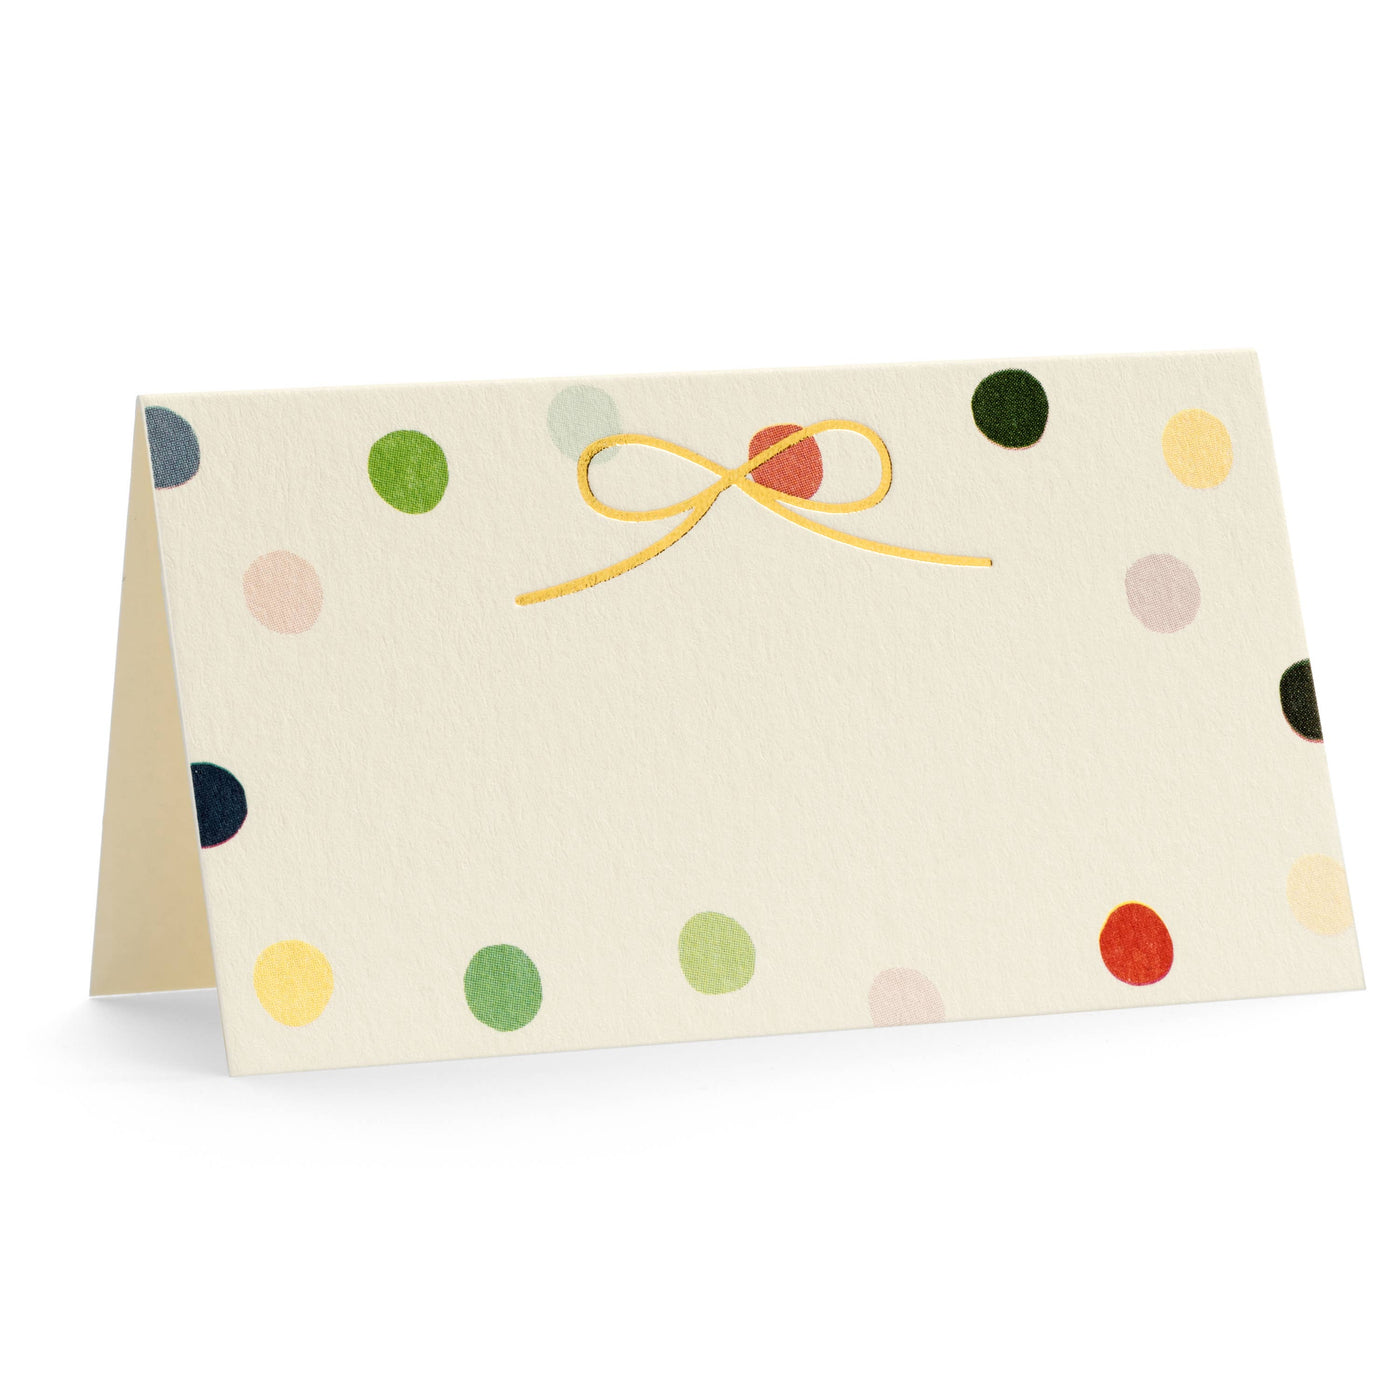 Polka Place Cards